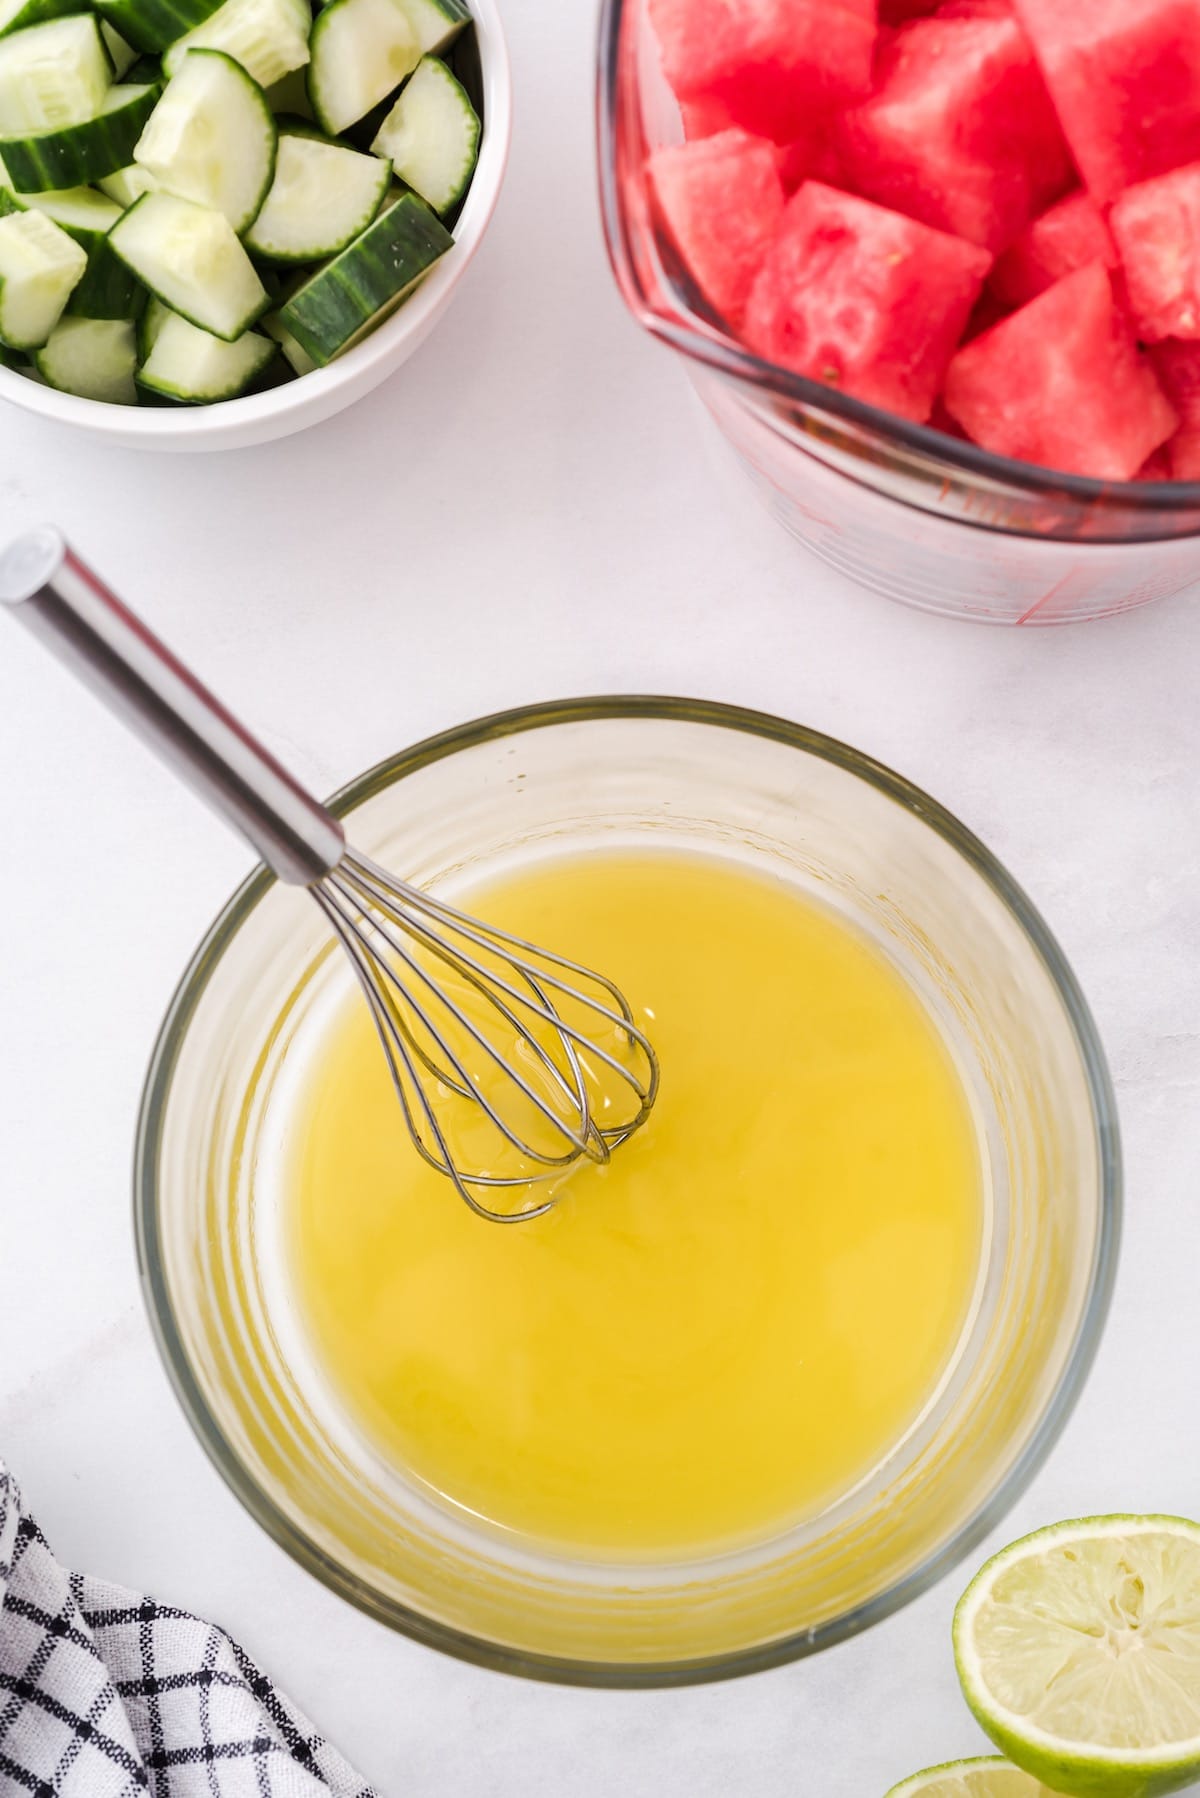 whisk together the olive oil and lime juice in a bowl